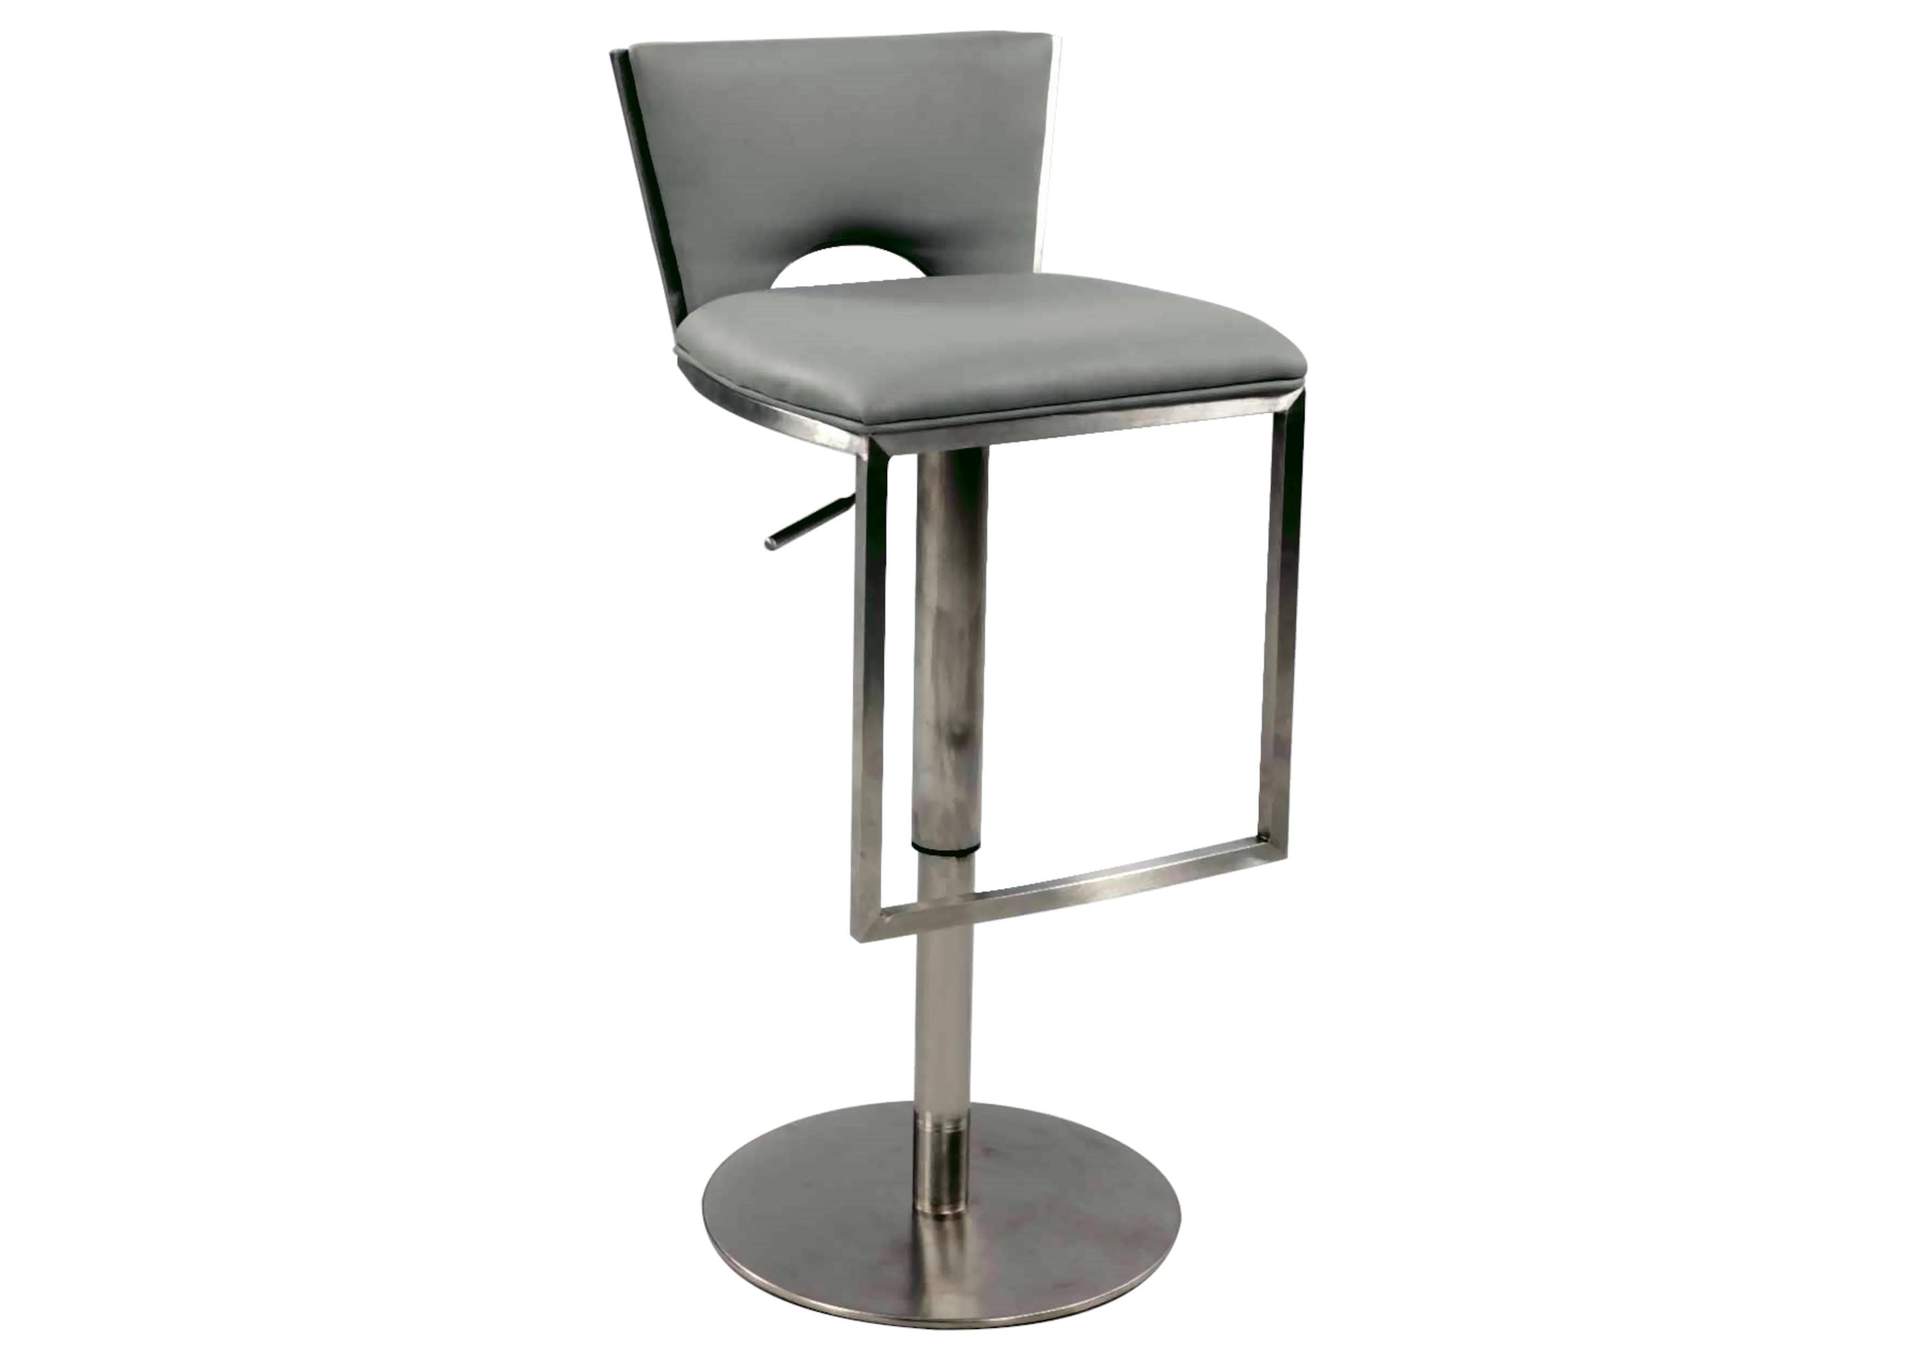 Low Back Upholstered Pneumatic-Adjustable Stool,Chintaly Imports